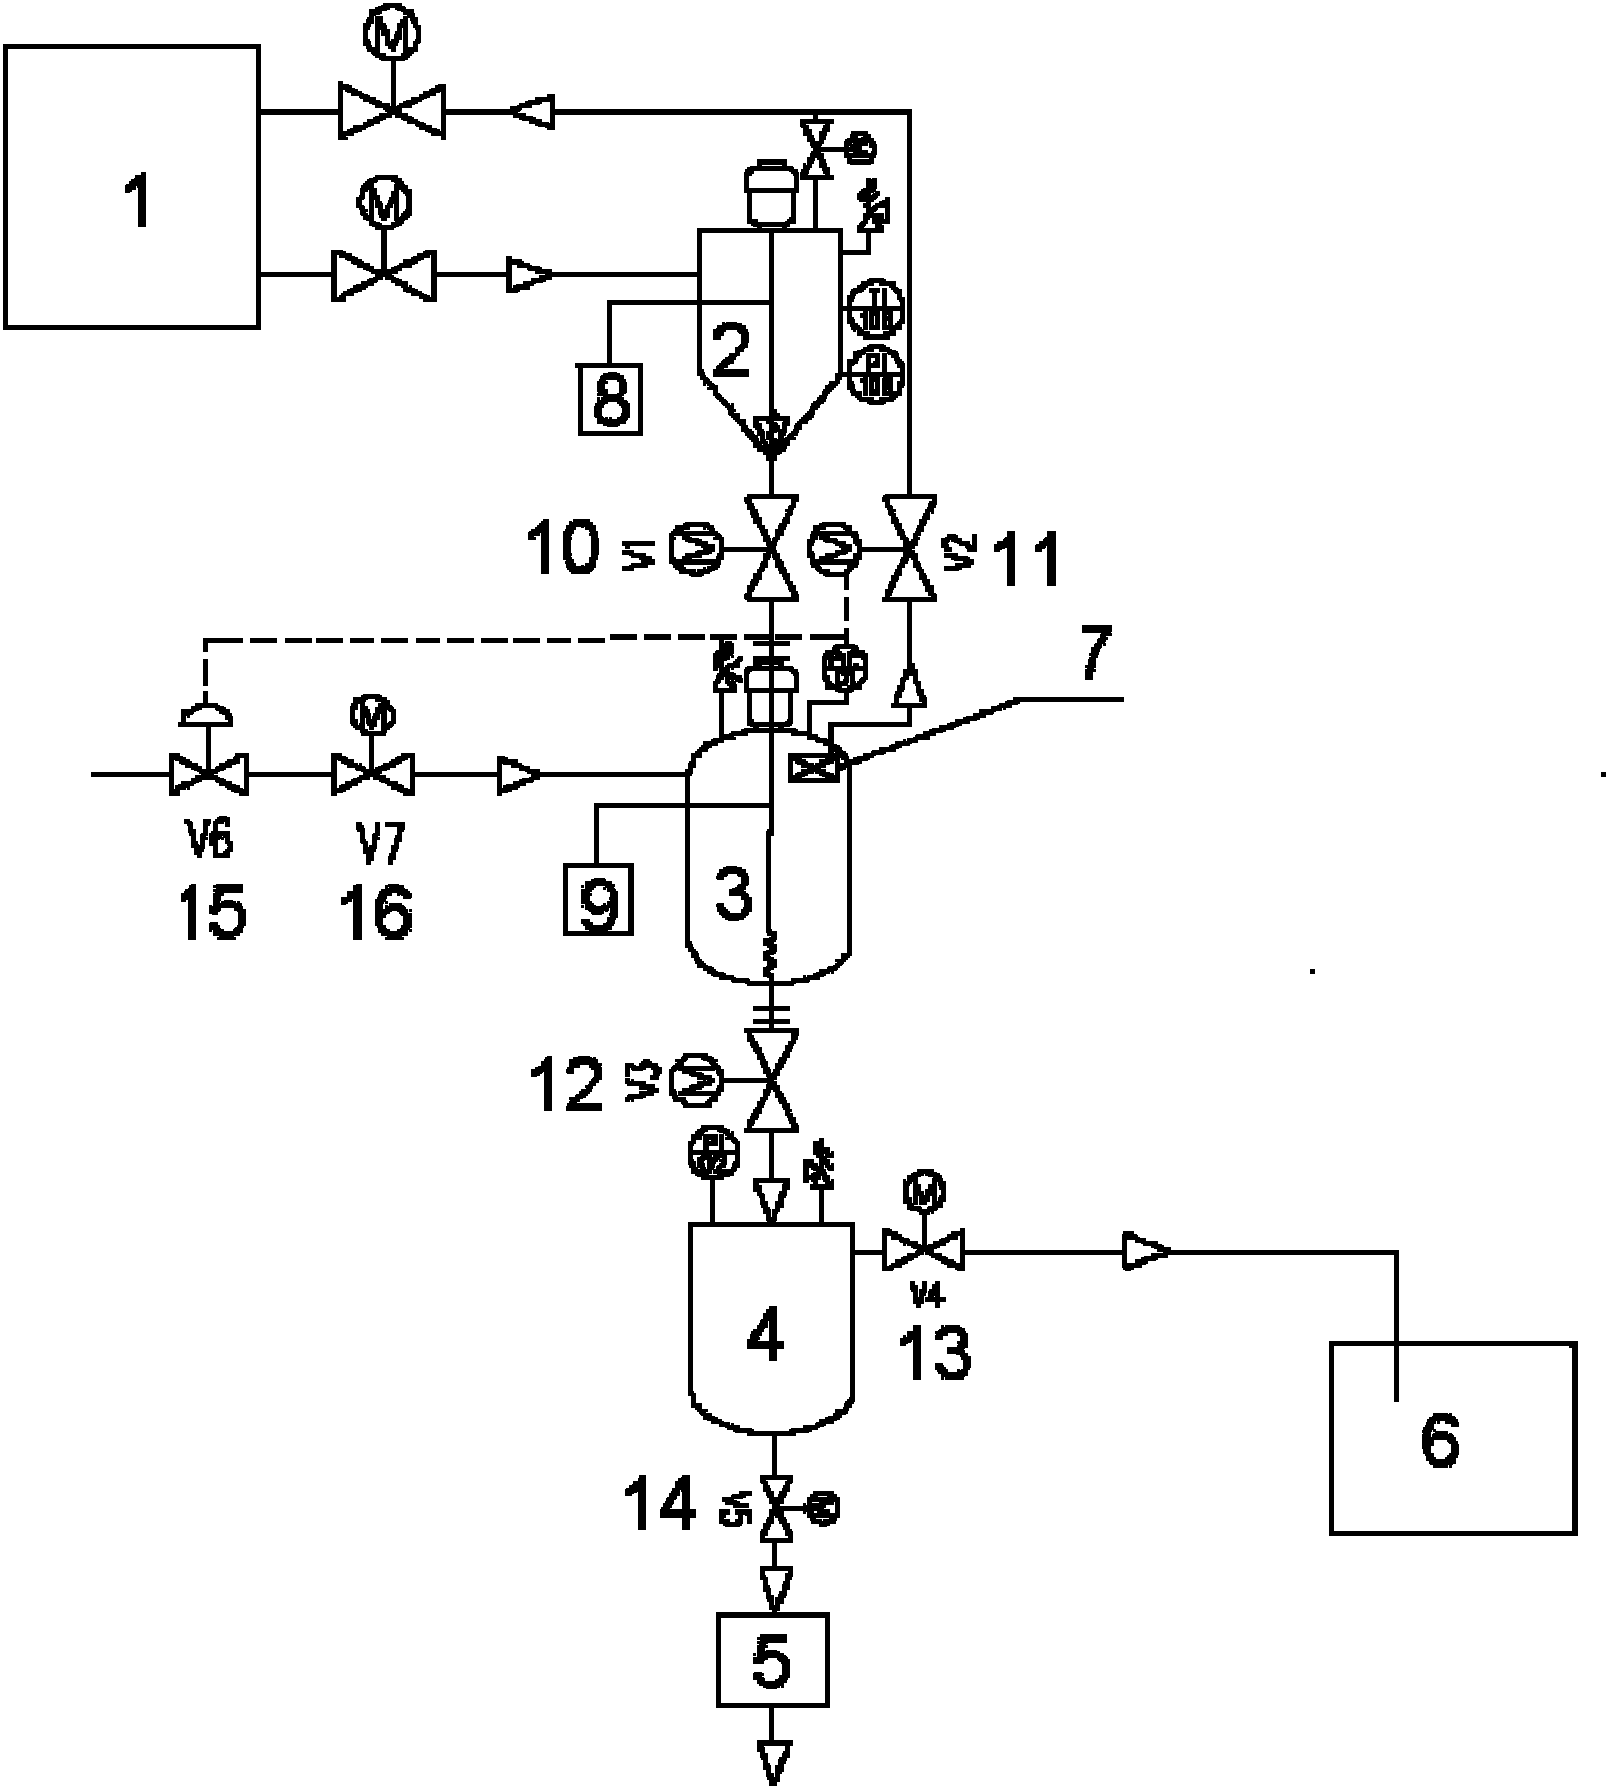 Desalting and salt discharging control method for supercritical water oxidation systems